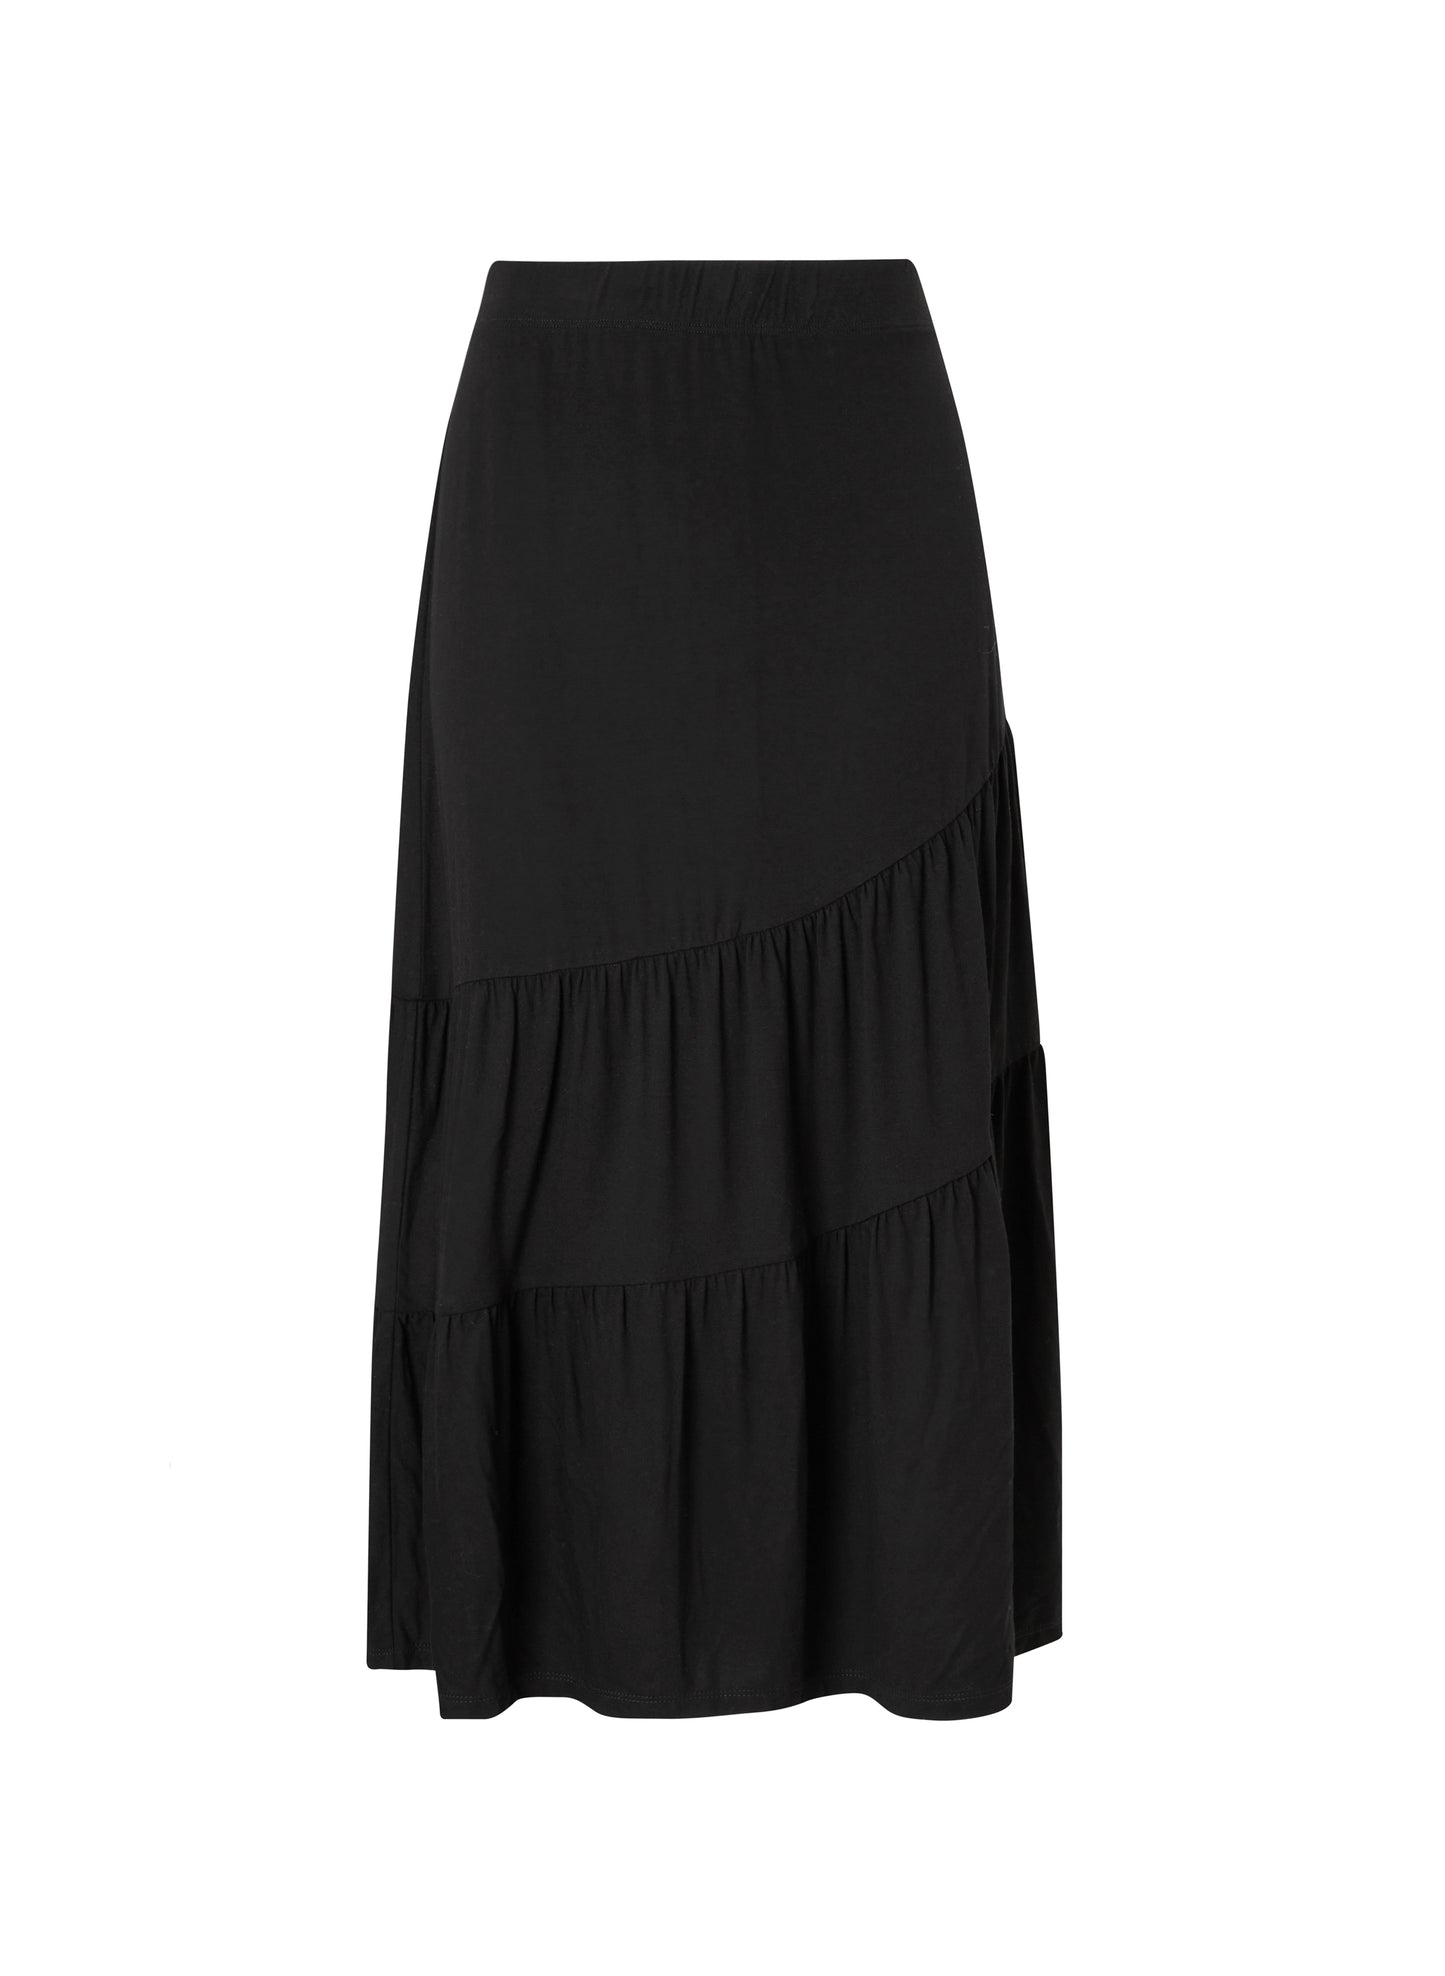 Pre-Loved Nora Skirt with LENZING™ ECOVERO™